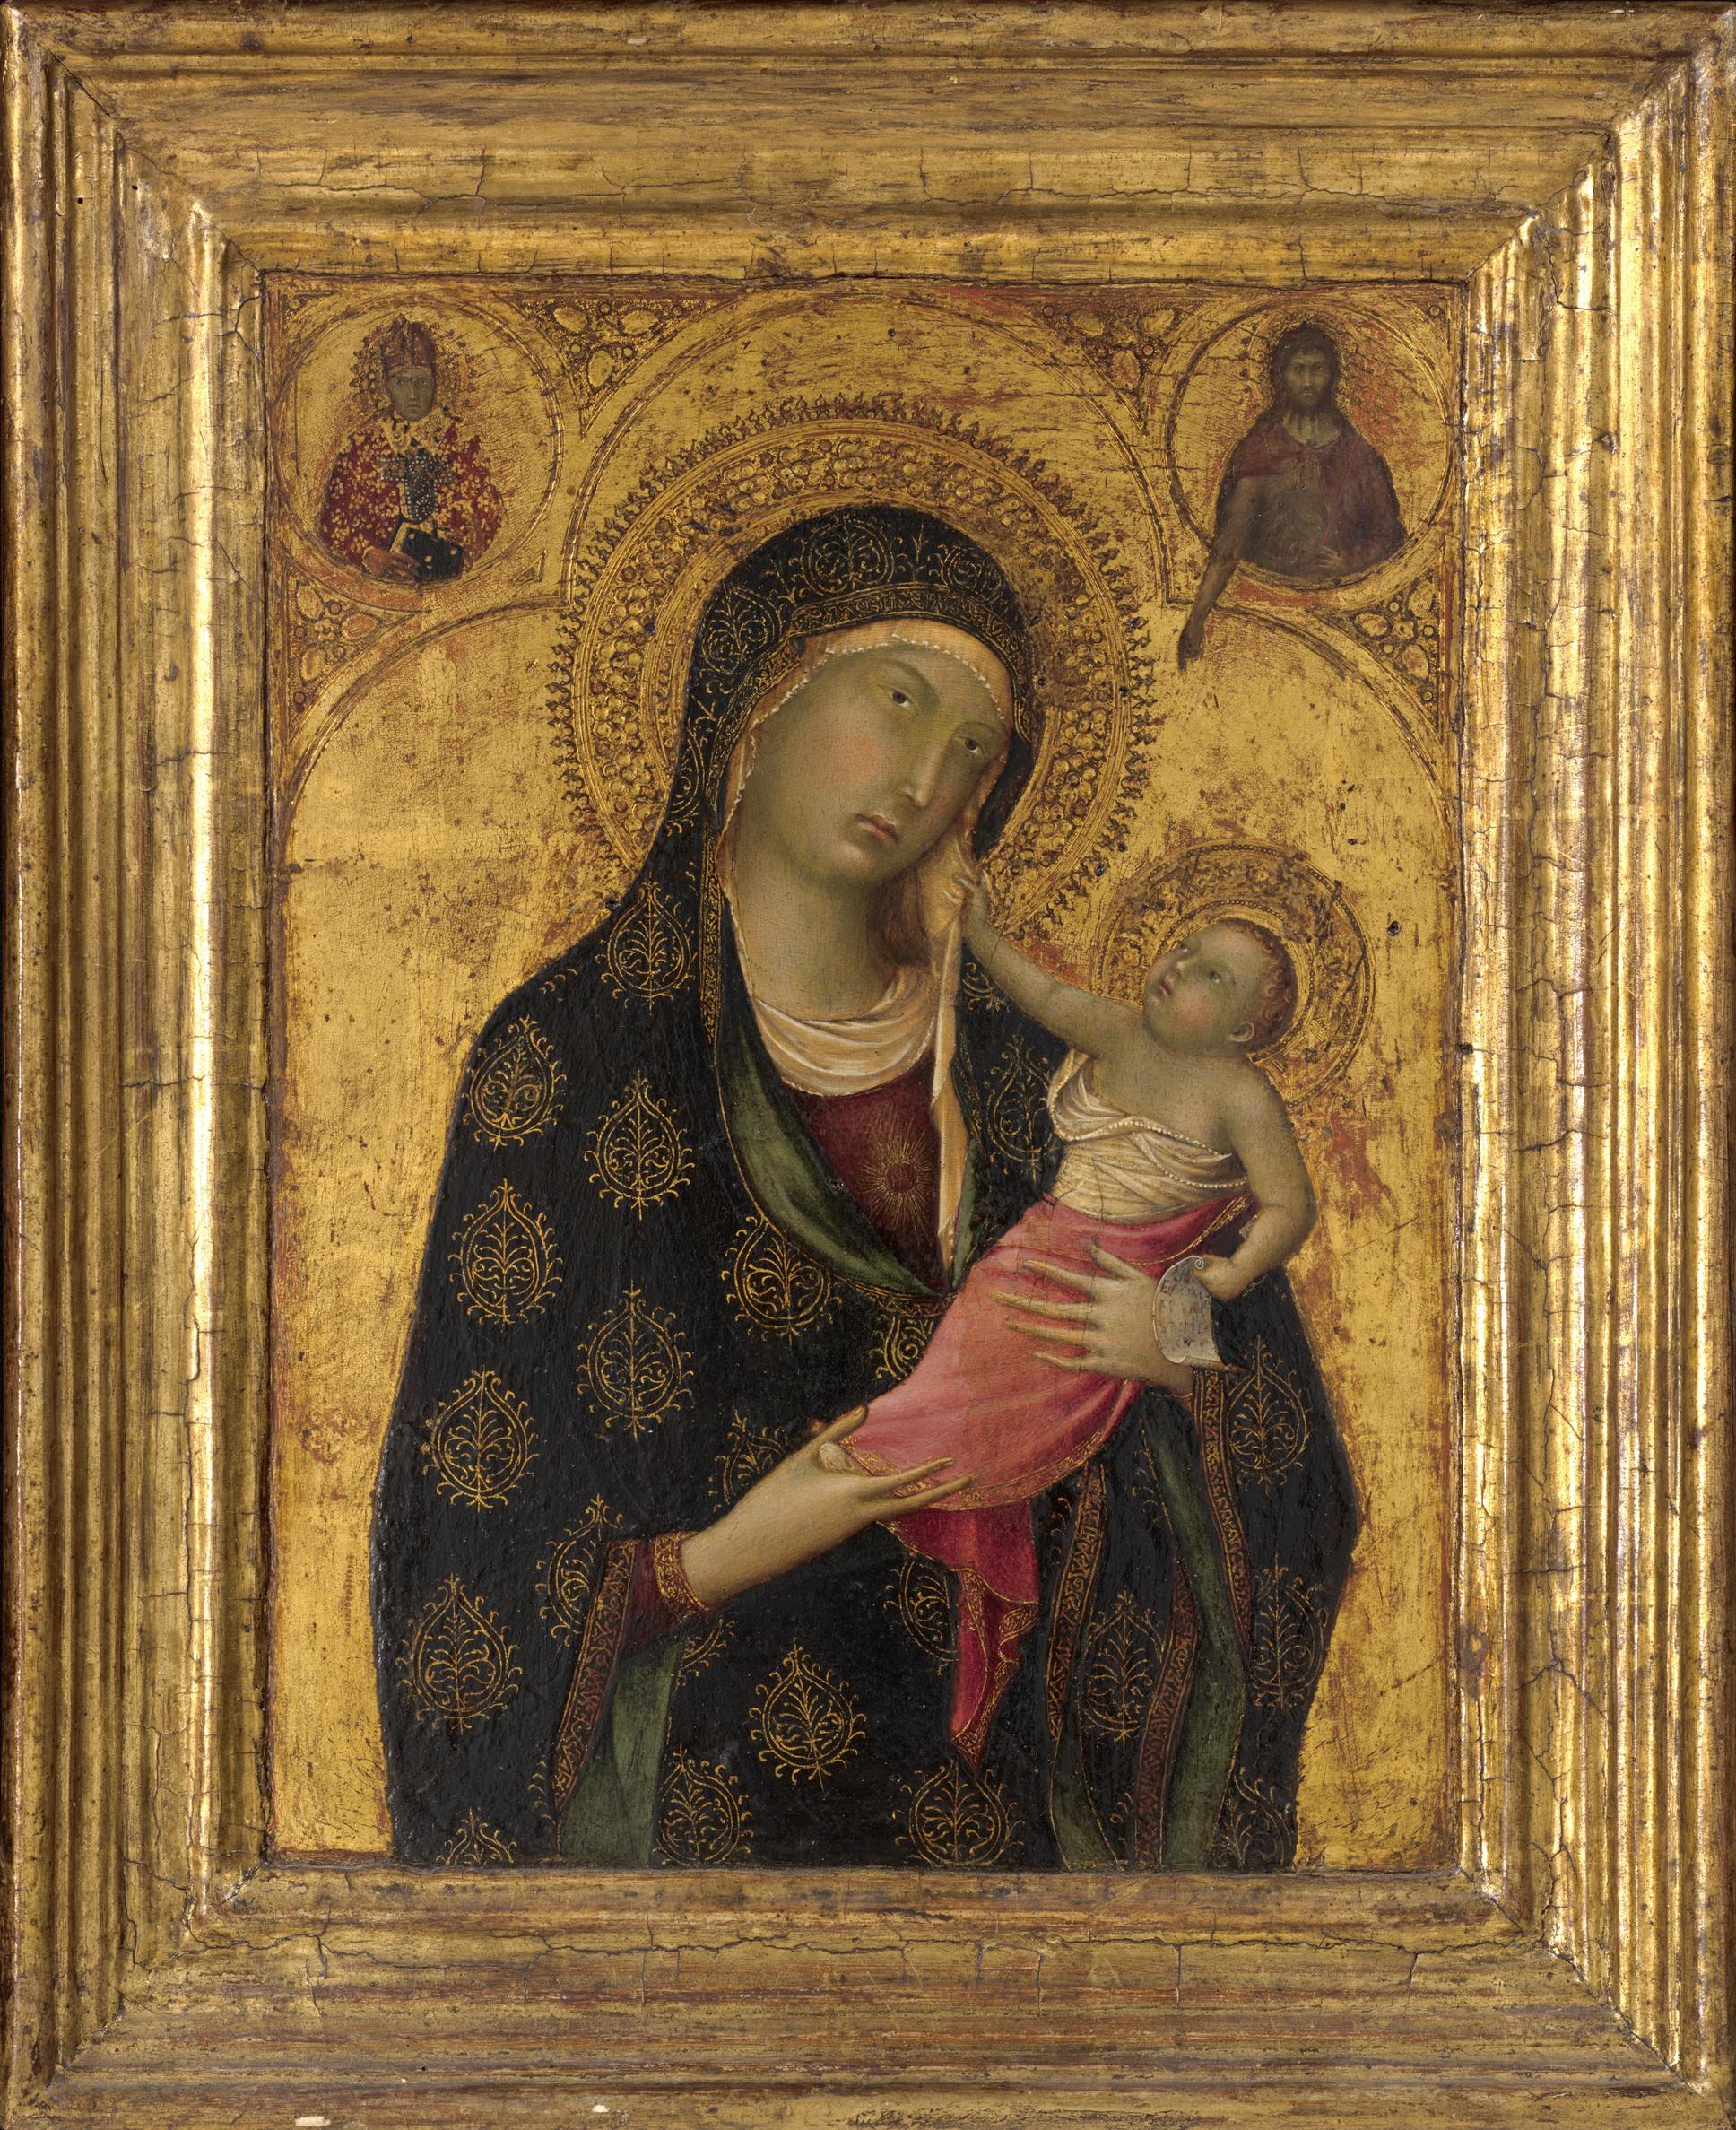 The Virgin Mary holds the infant Christ in both hands. He tugs at her veil, attempting to divert his mother’s attention. Dressed regally as the Queen of Heaven, she wears a lavish blue gown emblazoned with an elaborate floral motif picked out in gold, trimmed with a mordant-gilded border, and lined with scarlet.